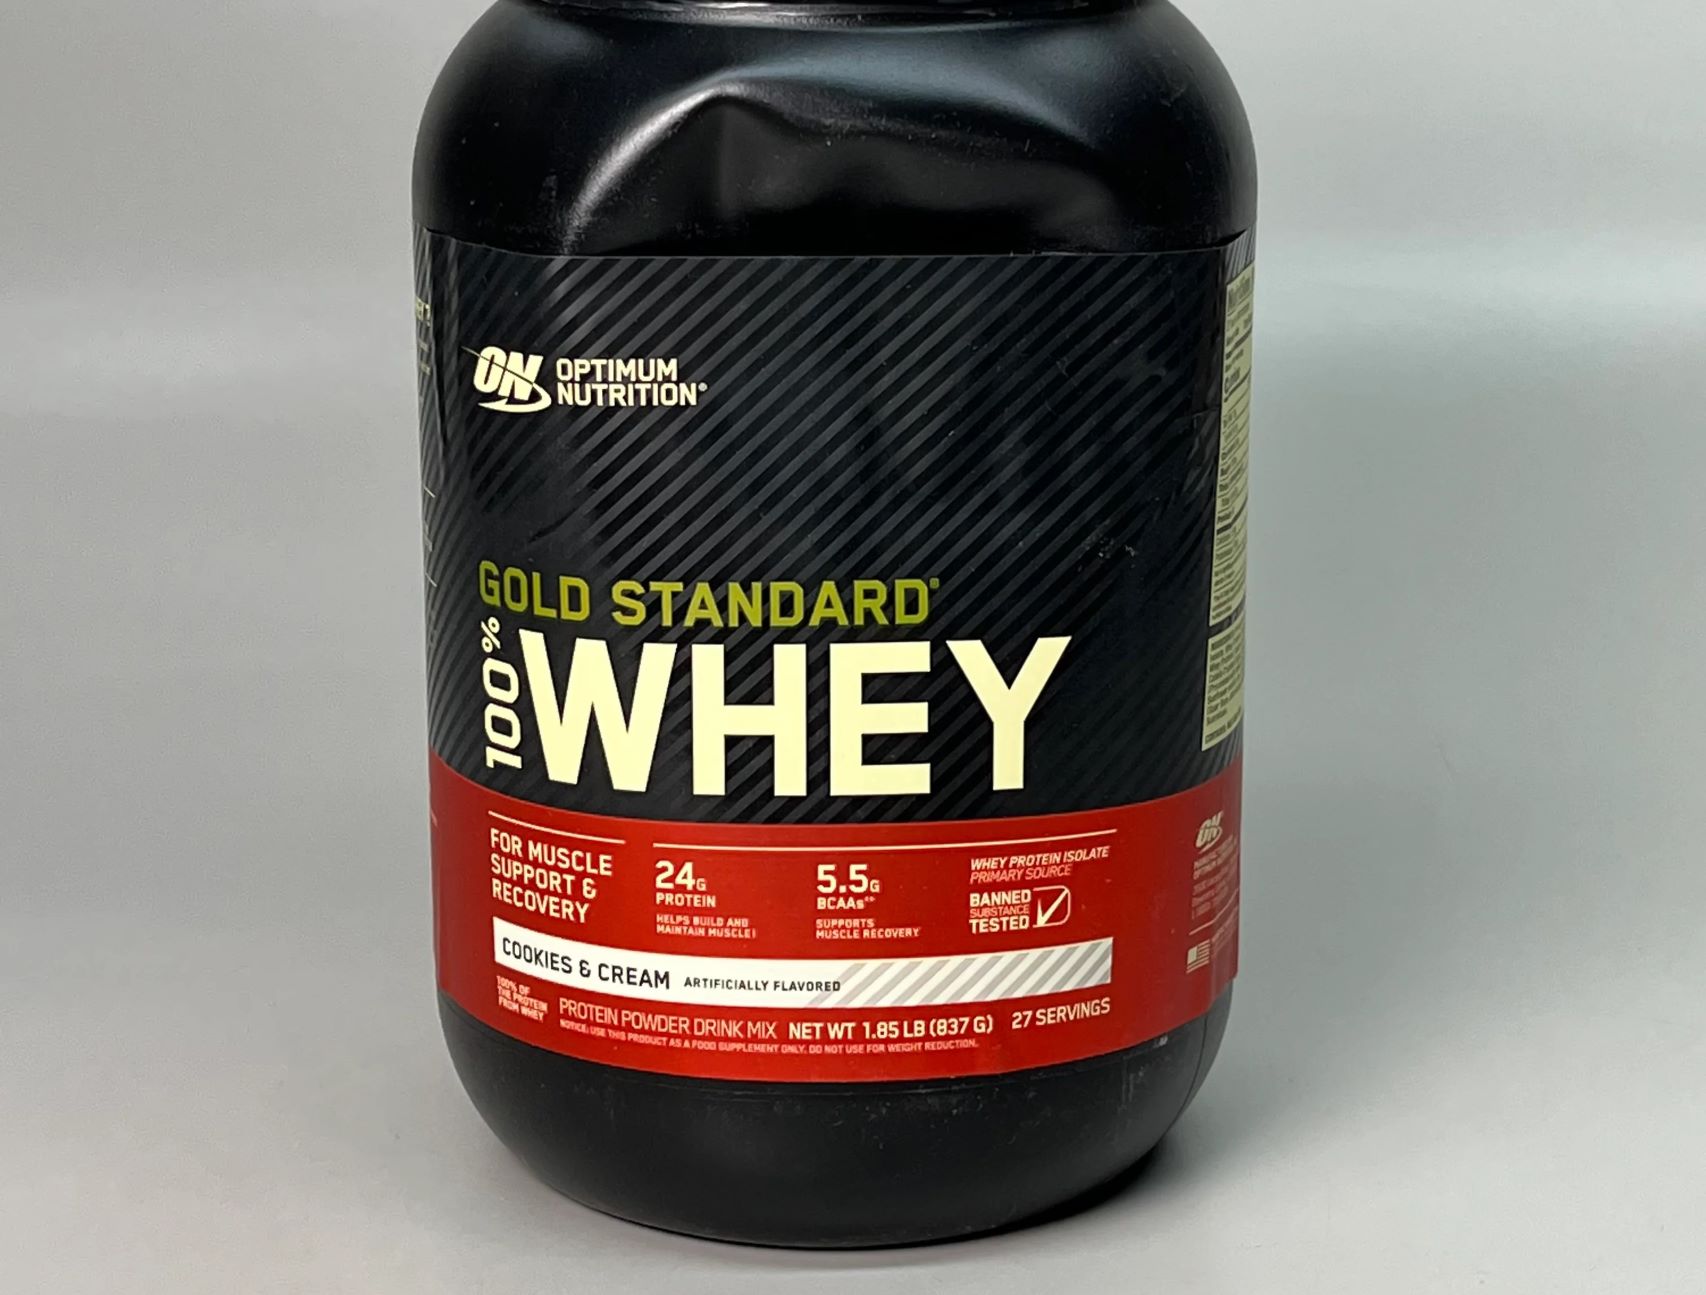 15 Gold Standard Whey Cookies And Cream Nutrition Facts - Facts.net